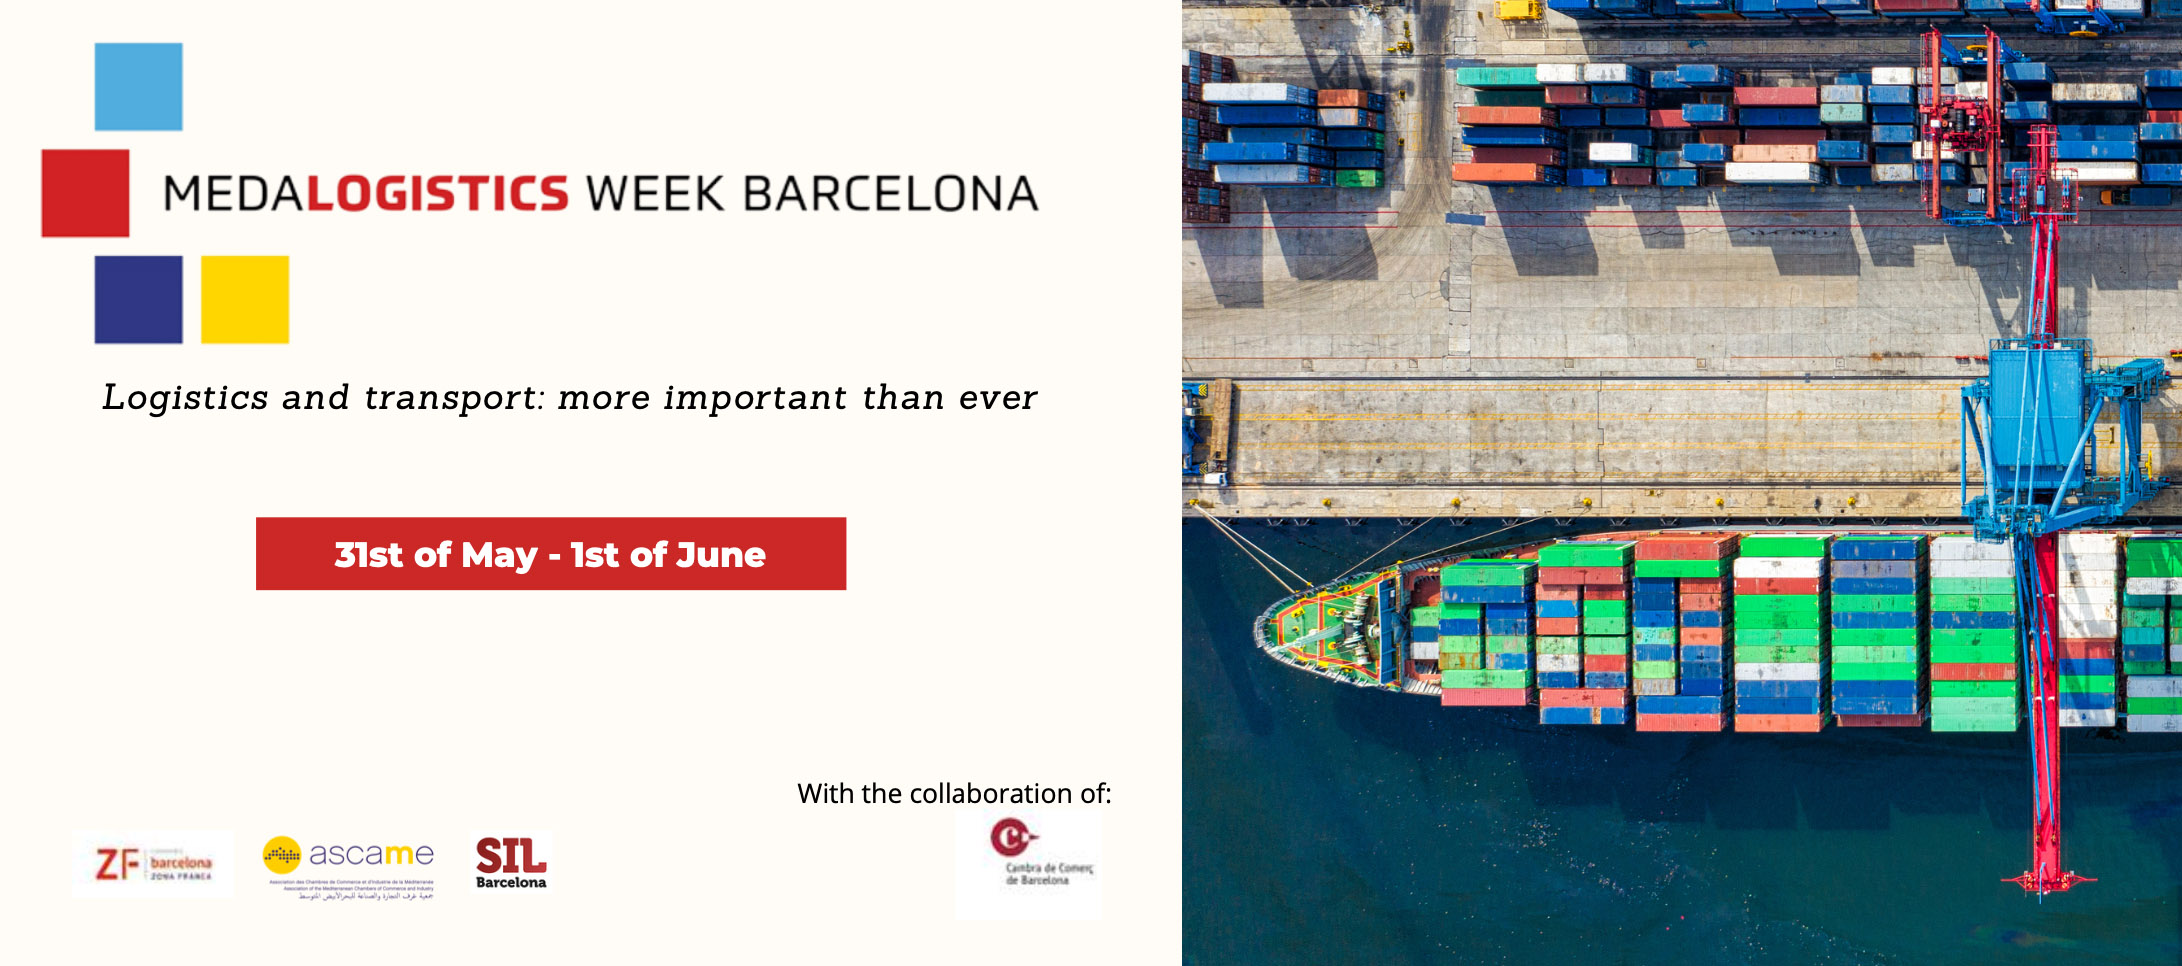 18th edition of MedaLogistics week in Barcelona